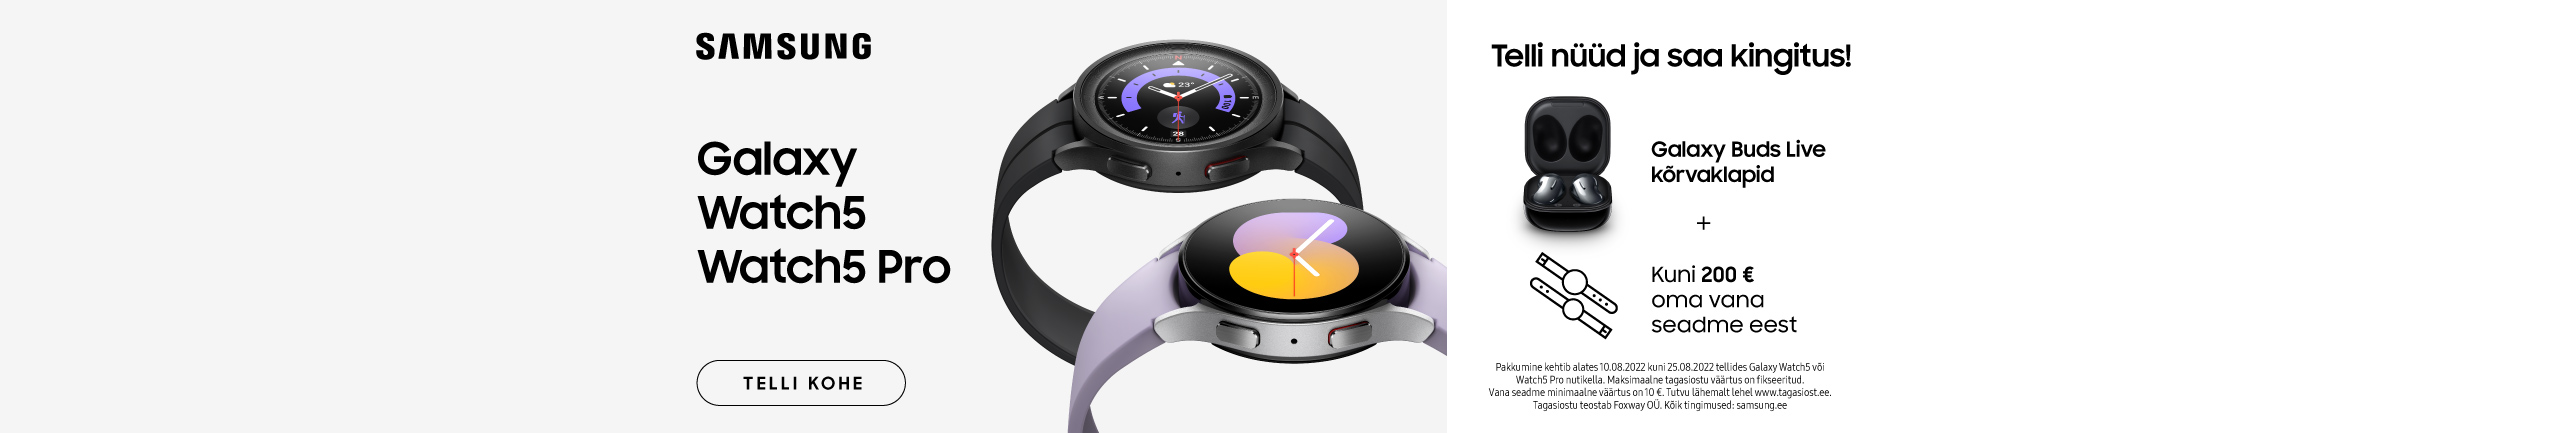 Pre-order Samsung Galaxy Watch 5 or Watch 5 Pro and get a Buds Live headphones as a complimentary gift!